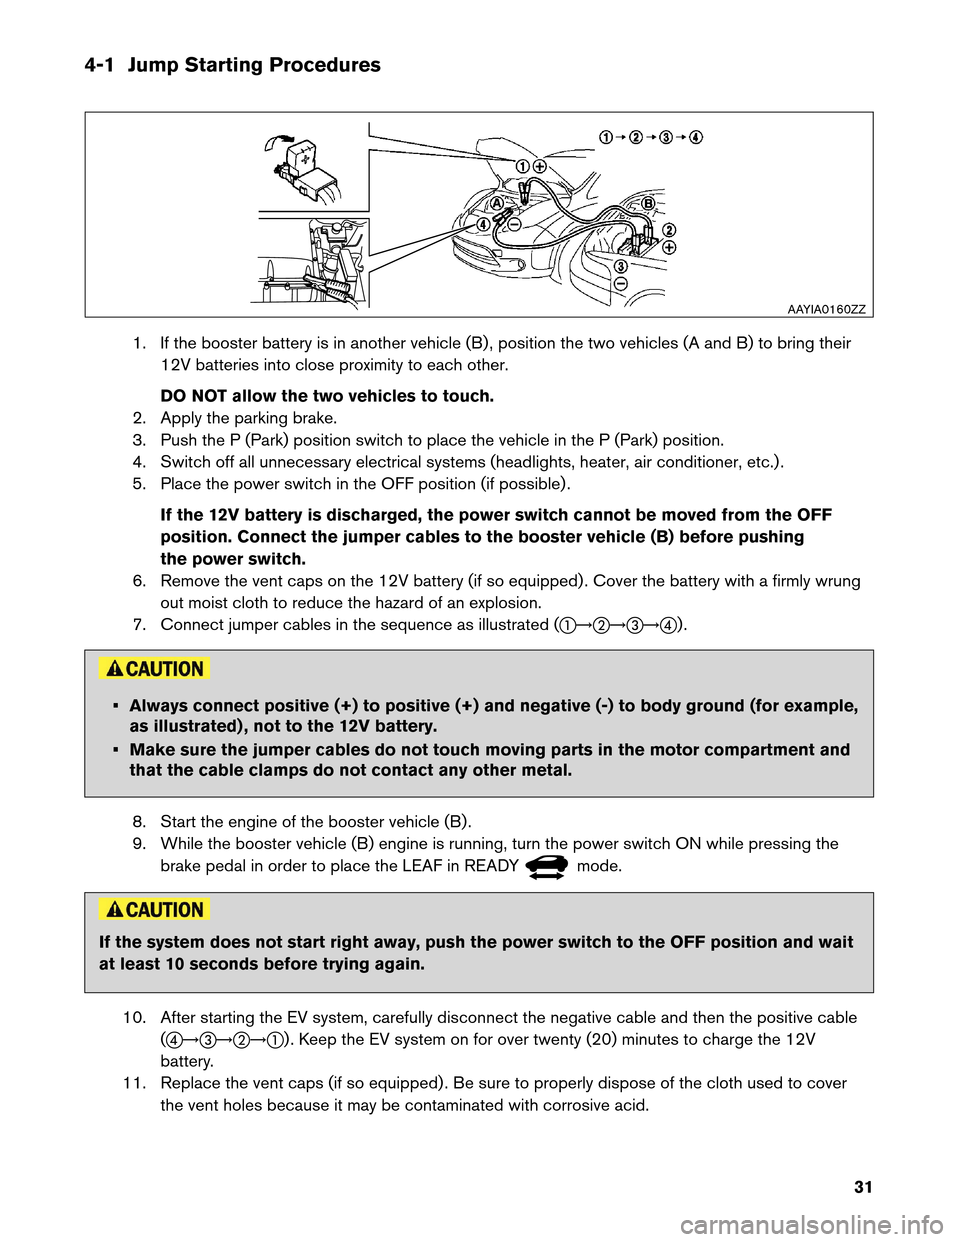 NISSAN LEAF 2013 1.G Dismantling Guide 4-1 Jump Starting Procedures
1. If the booster battery is in another vehicle (B) , position the two vehicles (A and B) to bring their
12V batteries into close proximity to each other.
DO NOT allow the